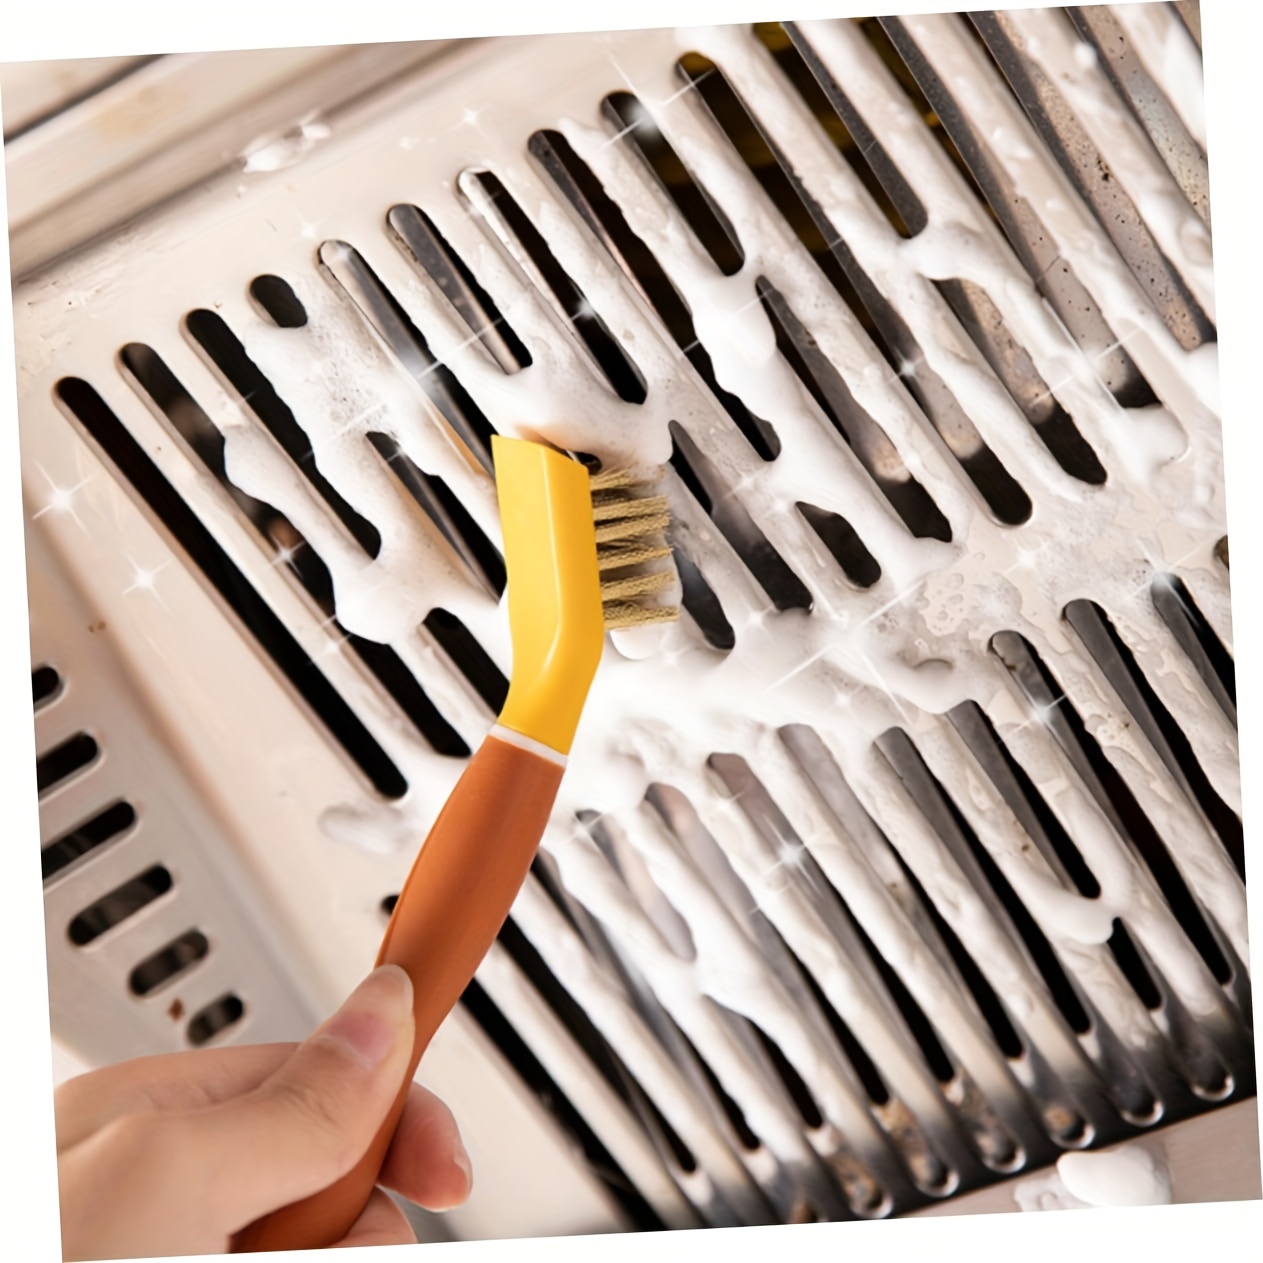 1Pc Range Hood Plastic Cleaning Scrub Brass Wire Brush Cooktop Scraper  Metal Scrubber Brushes For Kitchen Gas Stove Clean Tool